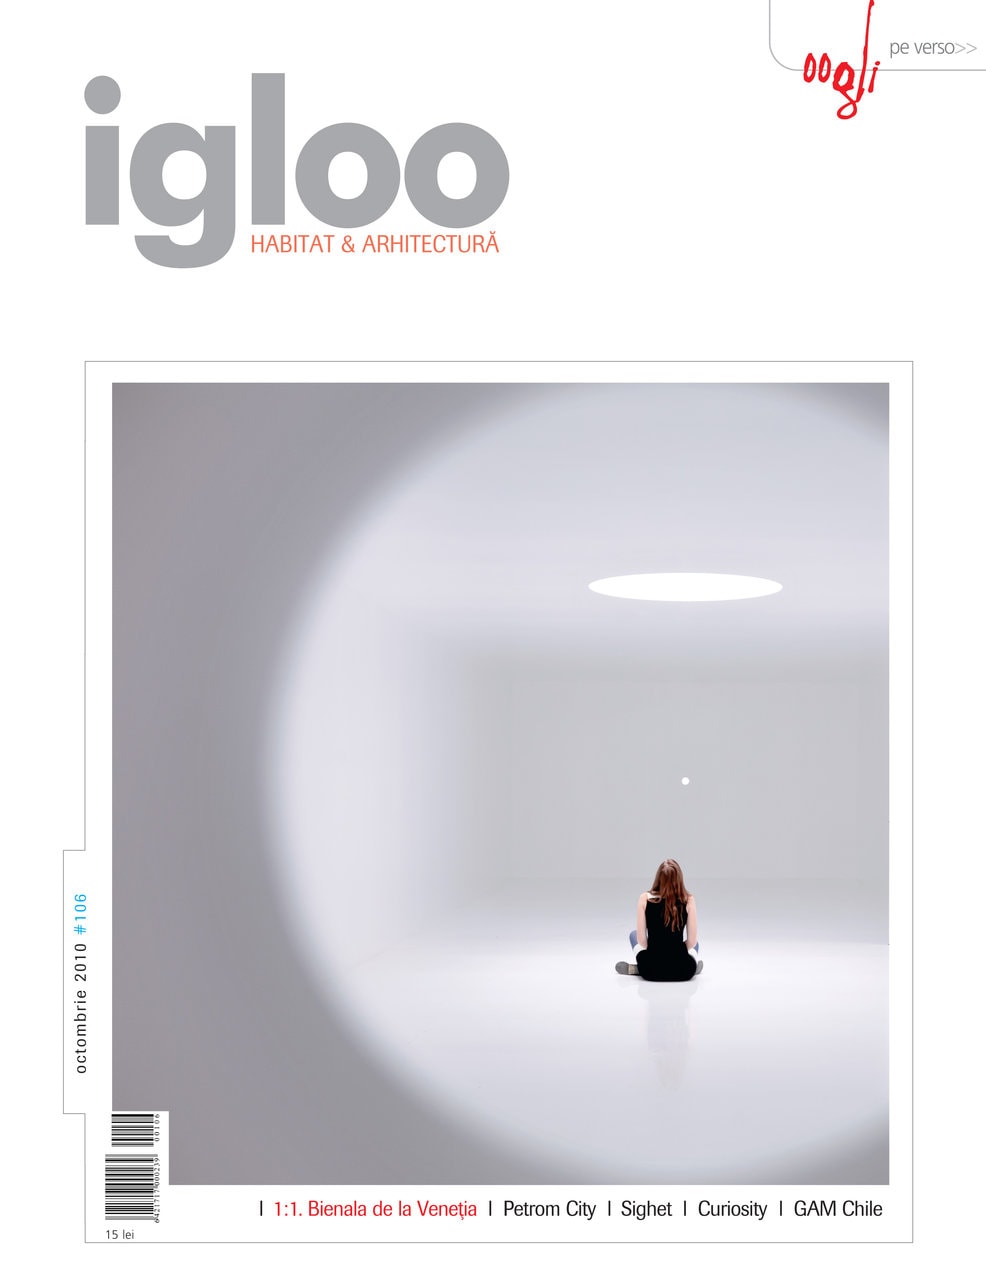 igloo 106. People Meet in Architecture